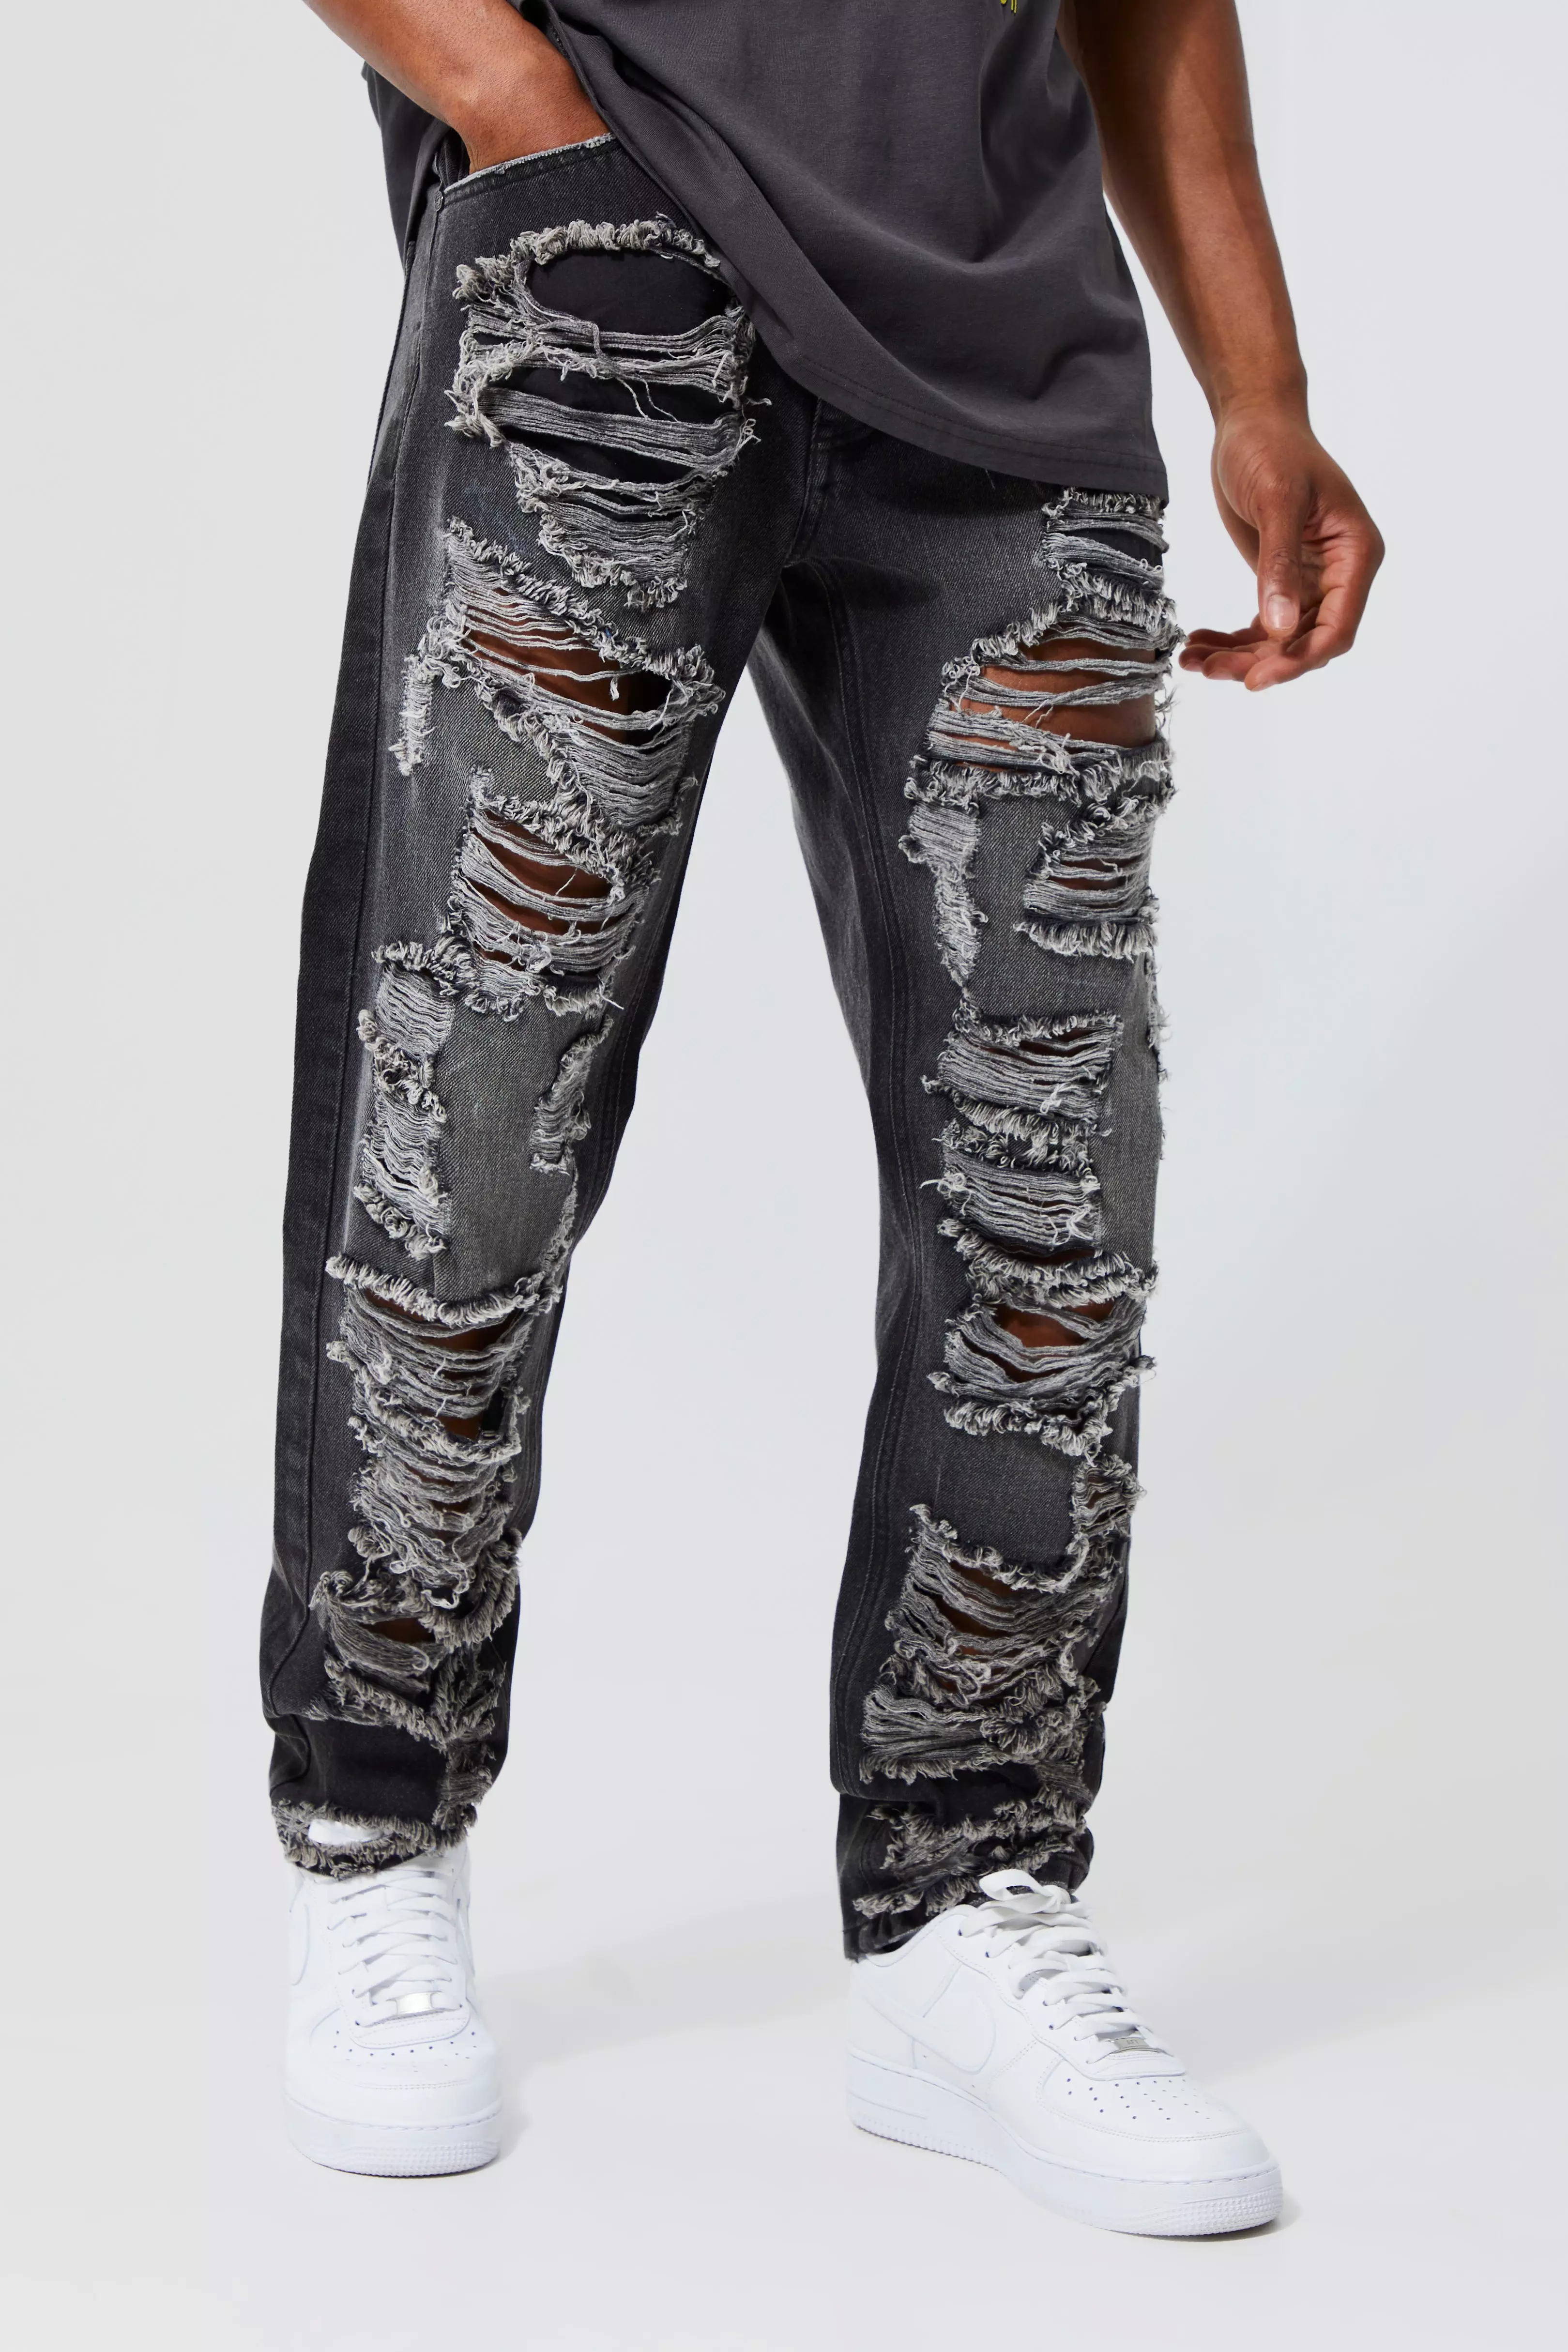 Black Ripped Jeans, Black Distressed Jeans